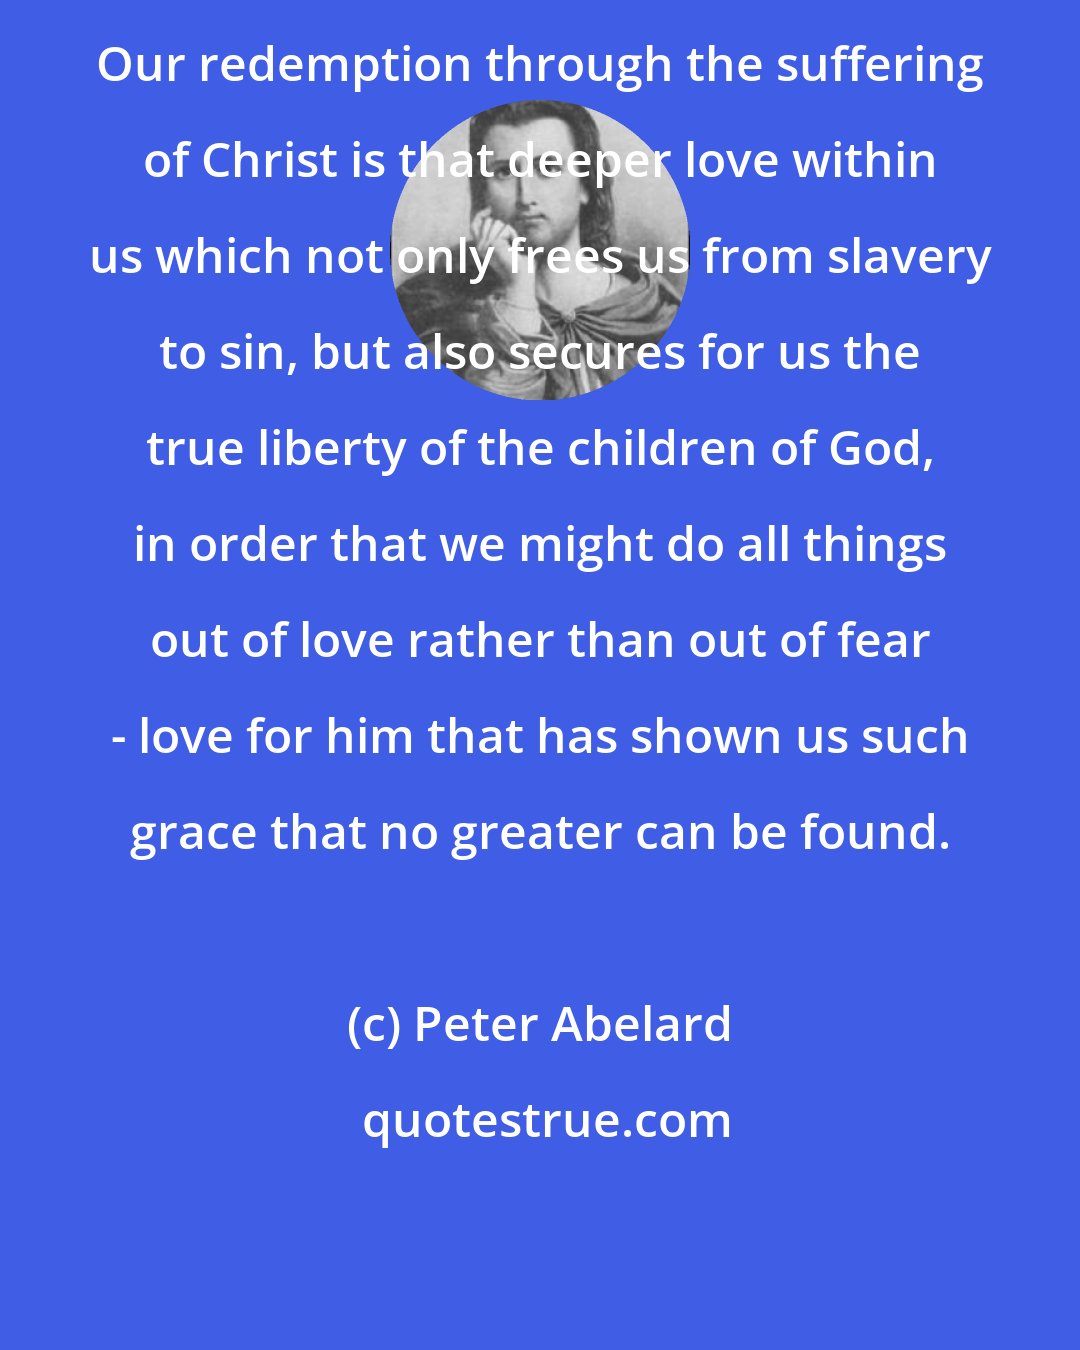 Peter Abelard: Our redemption through the suffering of Christ is that deeper love within us which not only frees us from slavery to sin, but also secures for us the true liberty of the children of God, in order that we might do all things out of love rather than out of fear - love for him that has shown us such grace that no greater can be found.